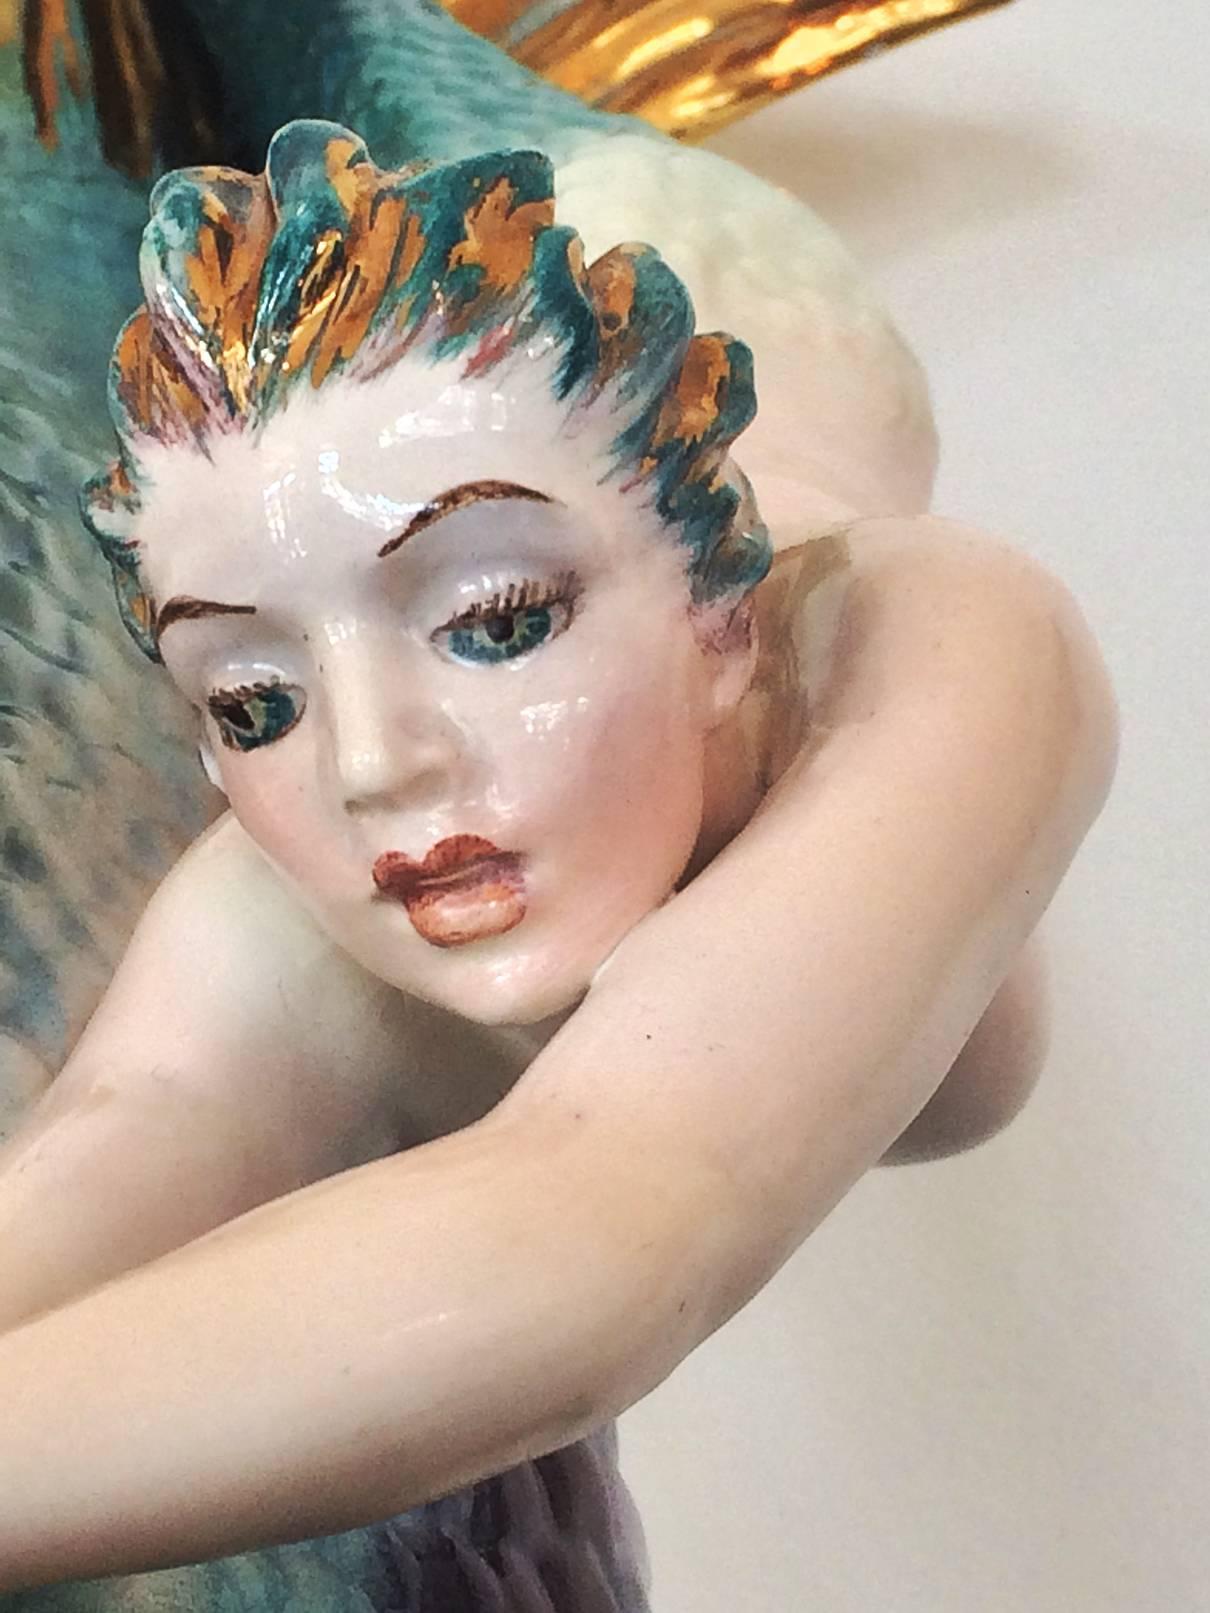 Art Deco Statue of a Mermaid Swimming with Fish, “Merbabe”. By Victor Bertolotti, Ex Lenci Artist, produced during the 1940’s, Company of Rising Sun of Italy. Amazing detail and great colours capturing the underwater “feel” of water. A rare and